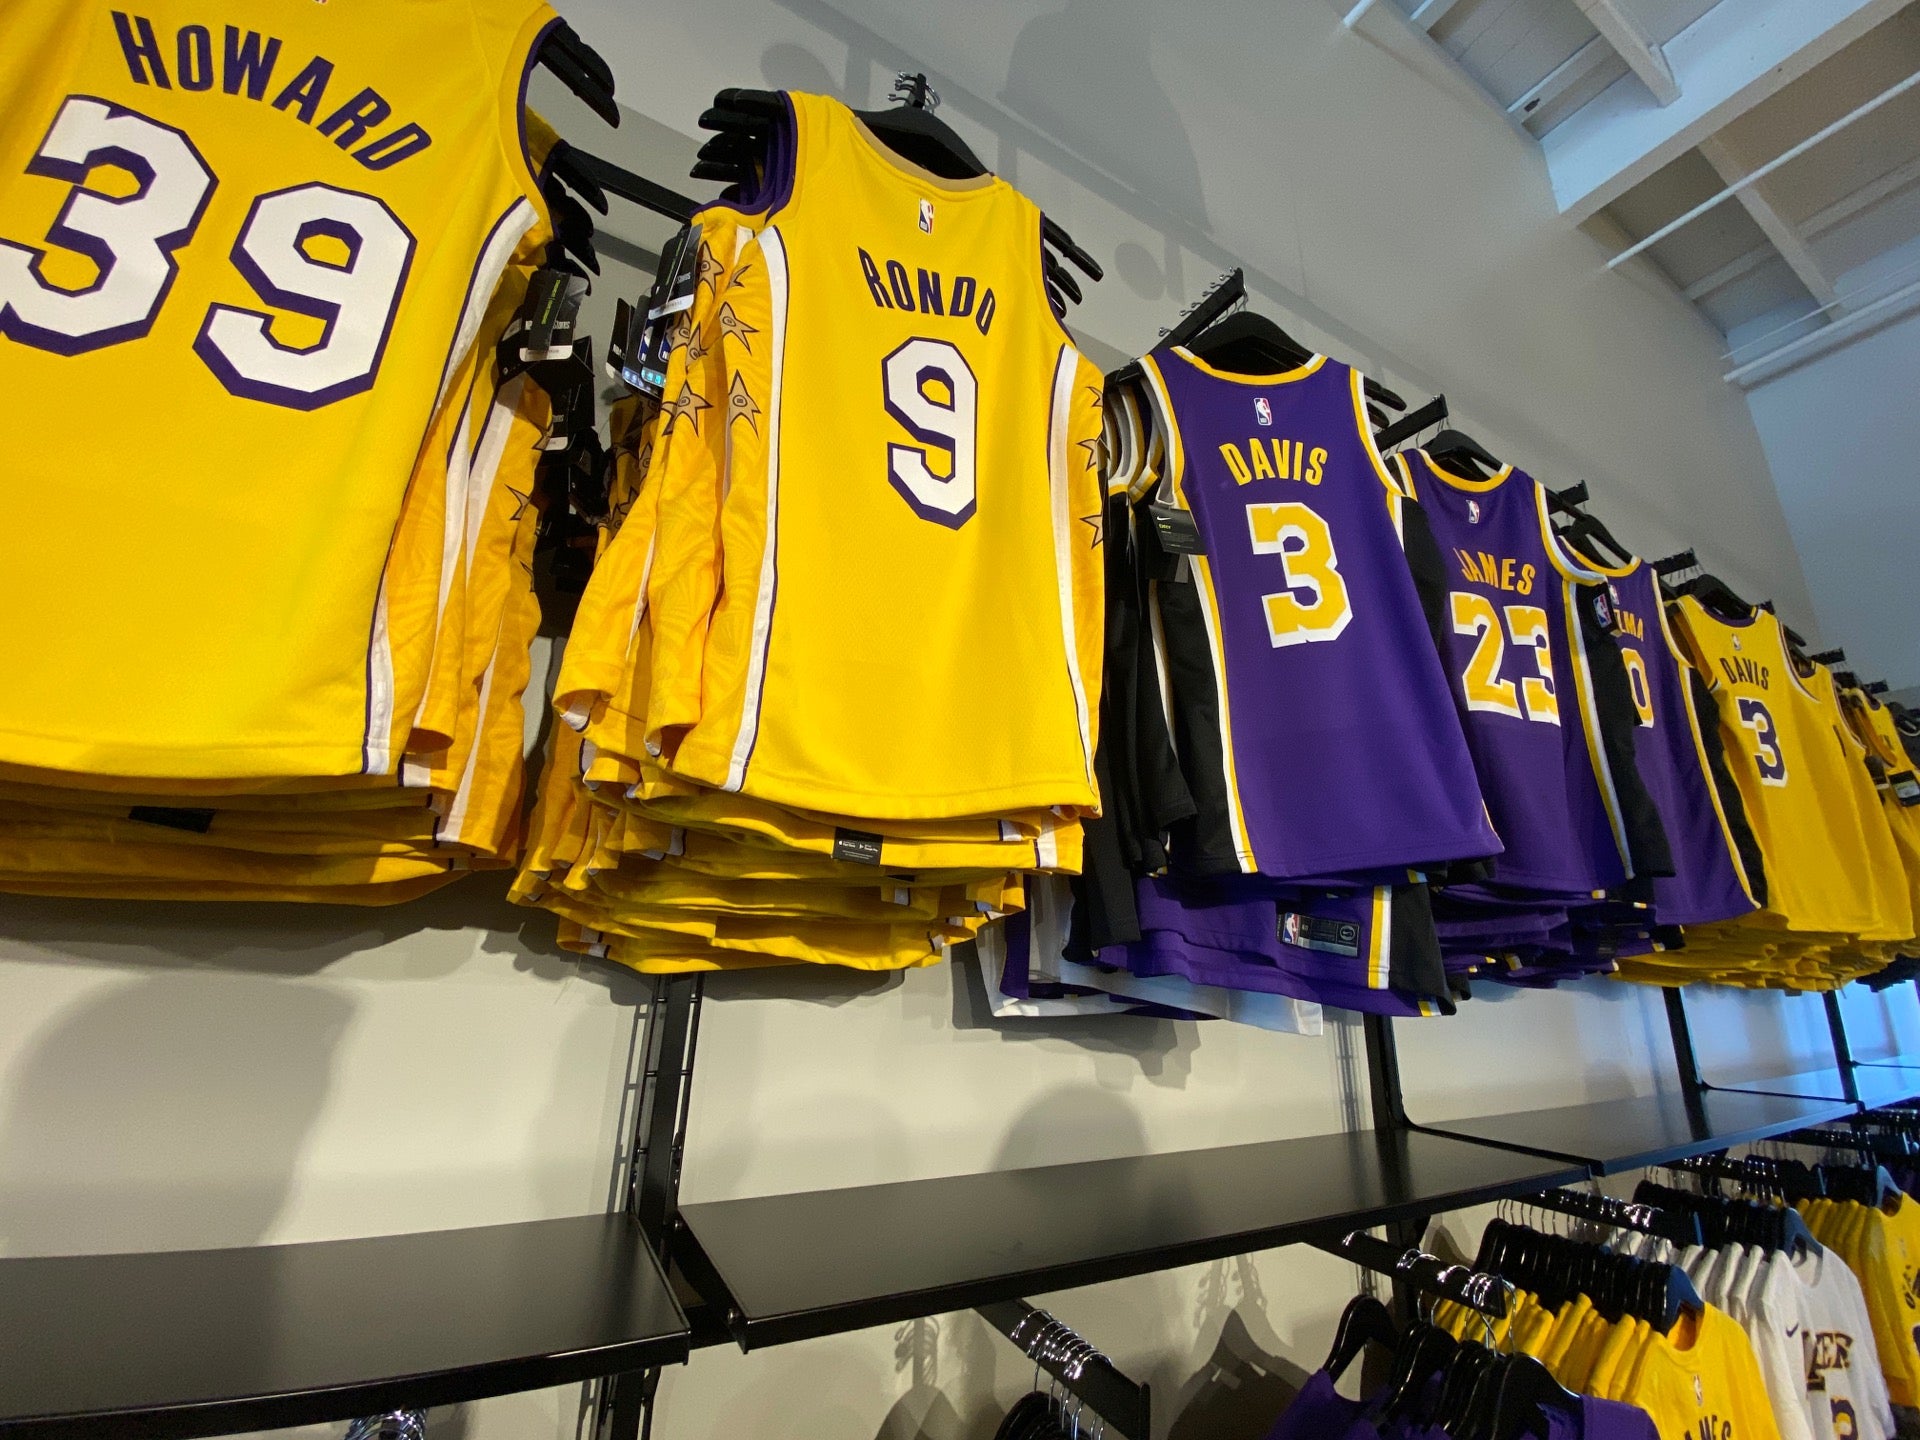 Lakers Store X:ssä: Check out all the awesome gear at the @LakersTeamShop  in El Segundo🙌🏼👌🏽🏀 #LakeShow  / X